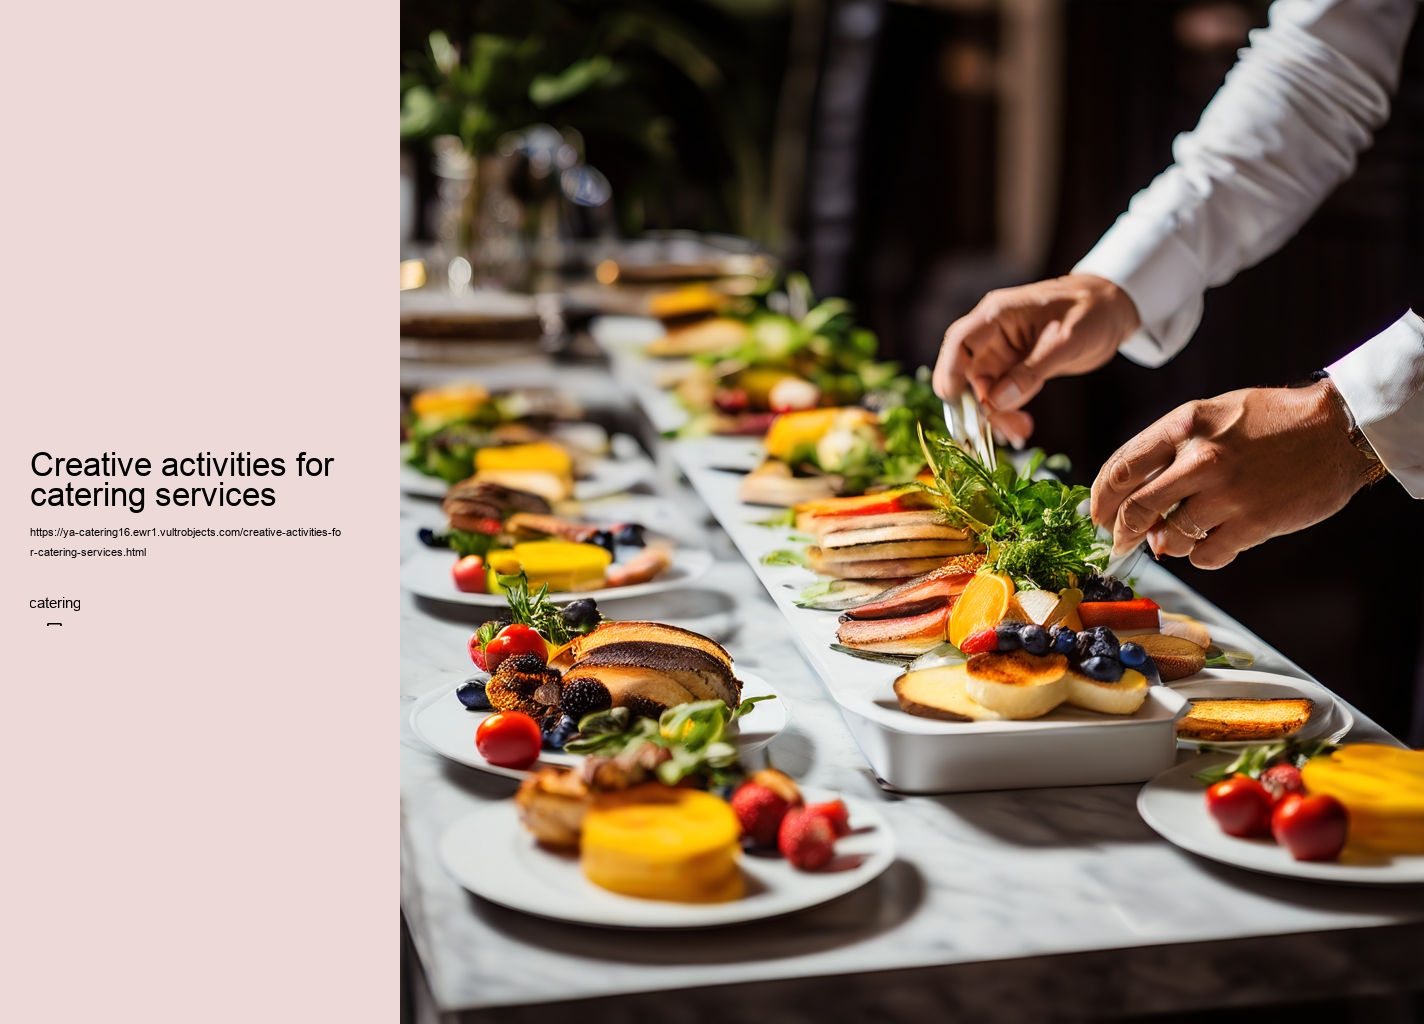 Creative activities for catering services